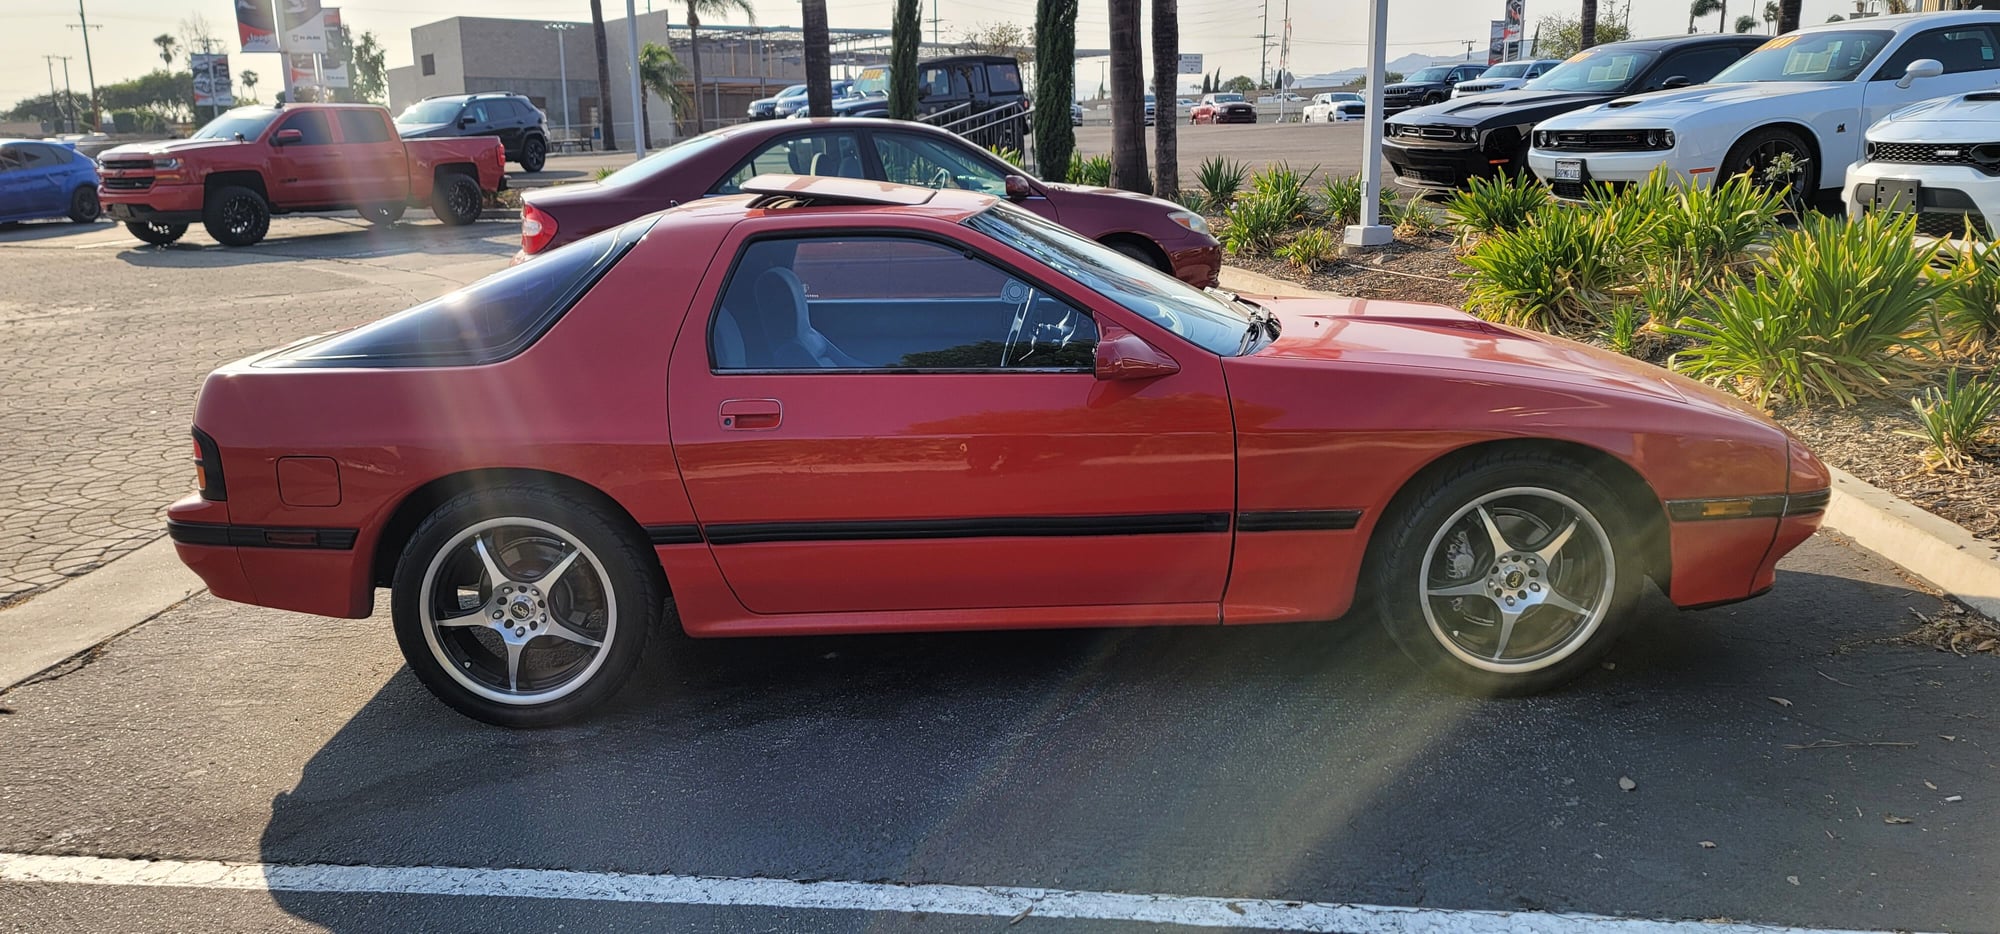 1987 Mazda RX-7 - 1987 Mazda RX7 Turbo II - Used - VIN jm1fc332xh0504552 - 114,137 Miles - Other - 2WD - Manual - Coupe - Red - Claremont, CA 91711, United States